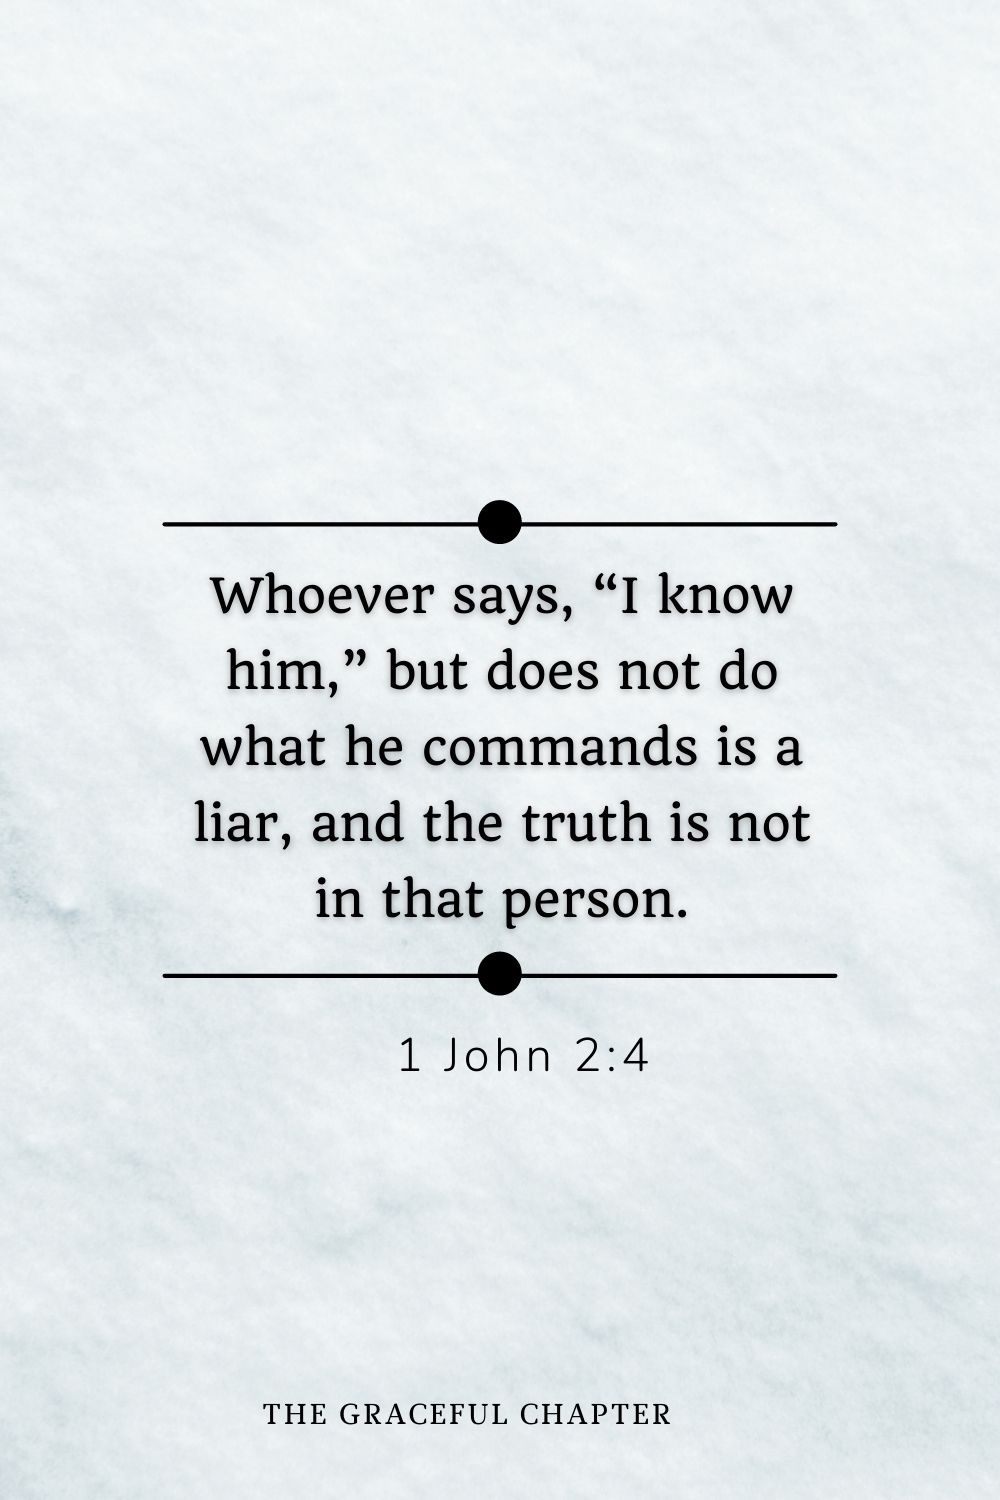 Whoever says, “I know him,” but does not do what he commands is a liar, and the truth is not in that person. 1 John 2:4